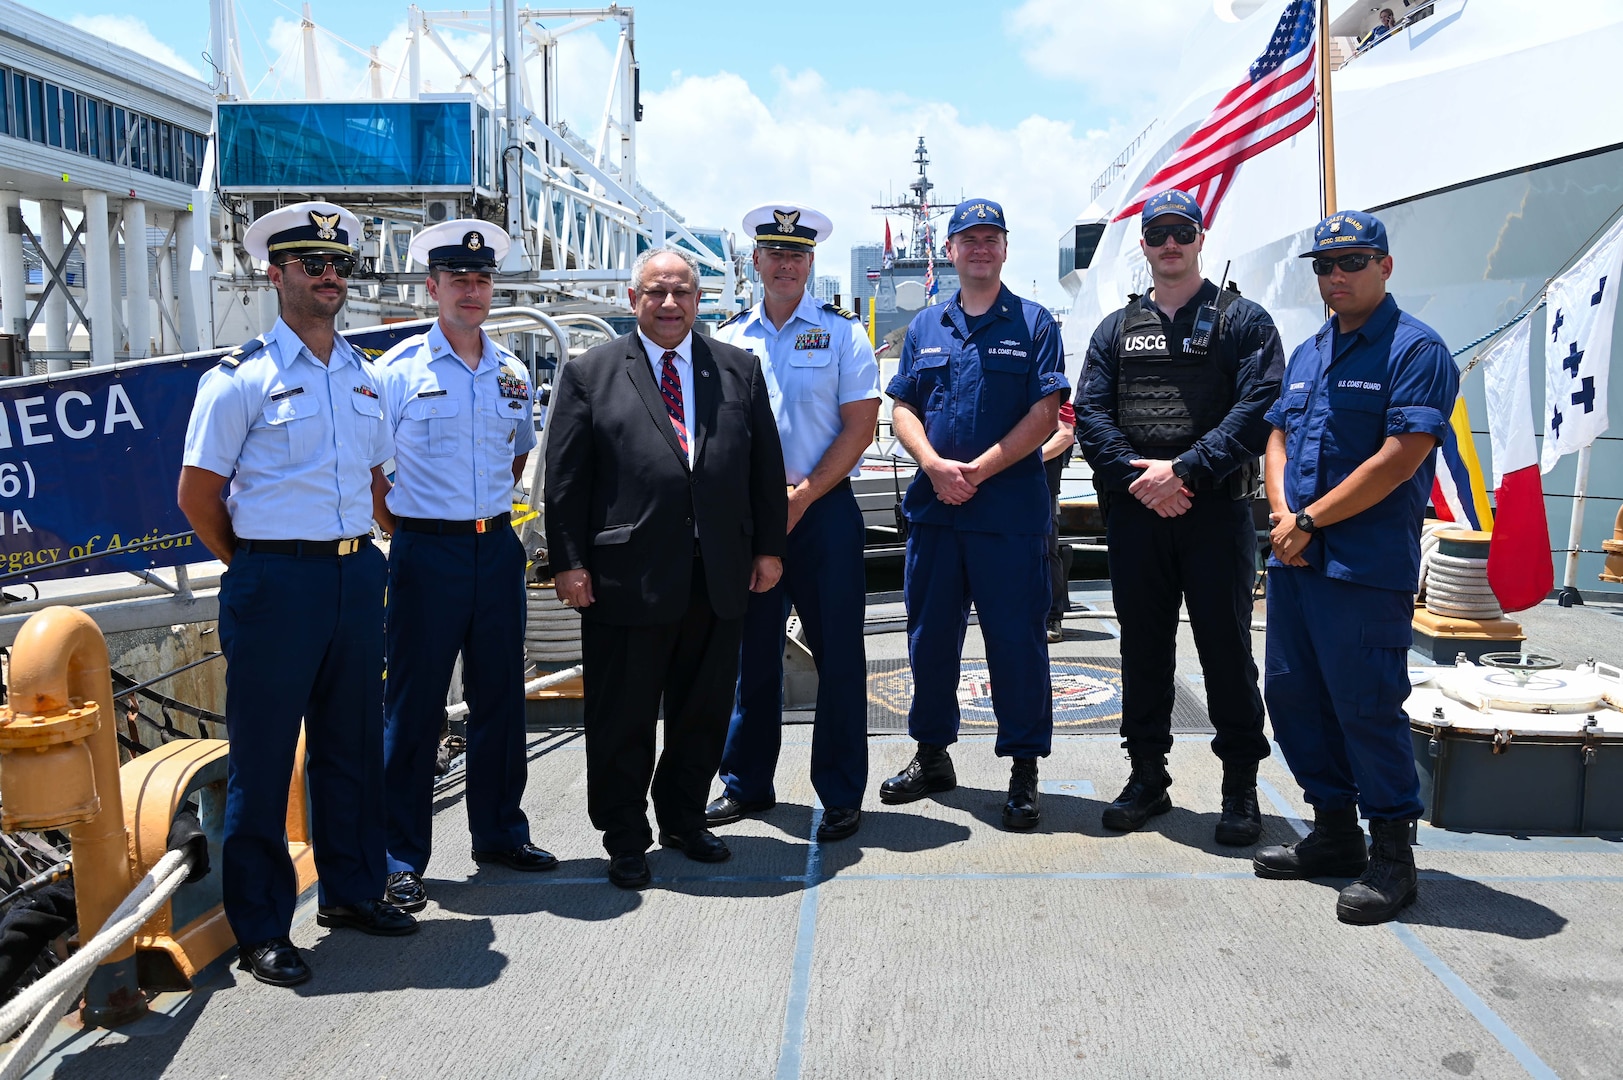 Secretary of the Navy Carlos Del Toro poses with a few members from the medium endurance cutter USCGC Seneca (WMEC 906) while visiting during Fleet Week Miami in PortMiami May 7, 2024. More than 3,000 members of the Navy, Marine Corps and Coast Guard arrived in South Florida to participate in various events including flyovers of military aircraft, concerts and visiting local attractions and community events. (U.S. Coast Guard photo by Petty Officer 2nd Class Diana Sherbs)